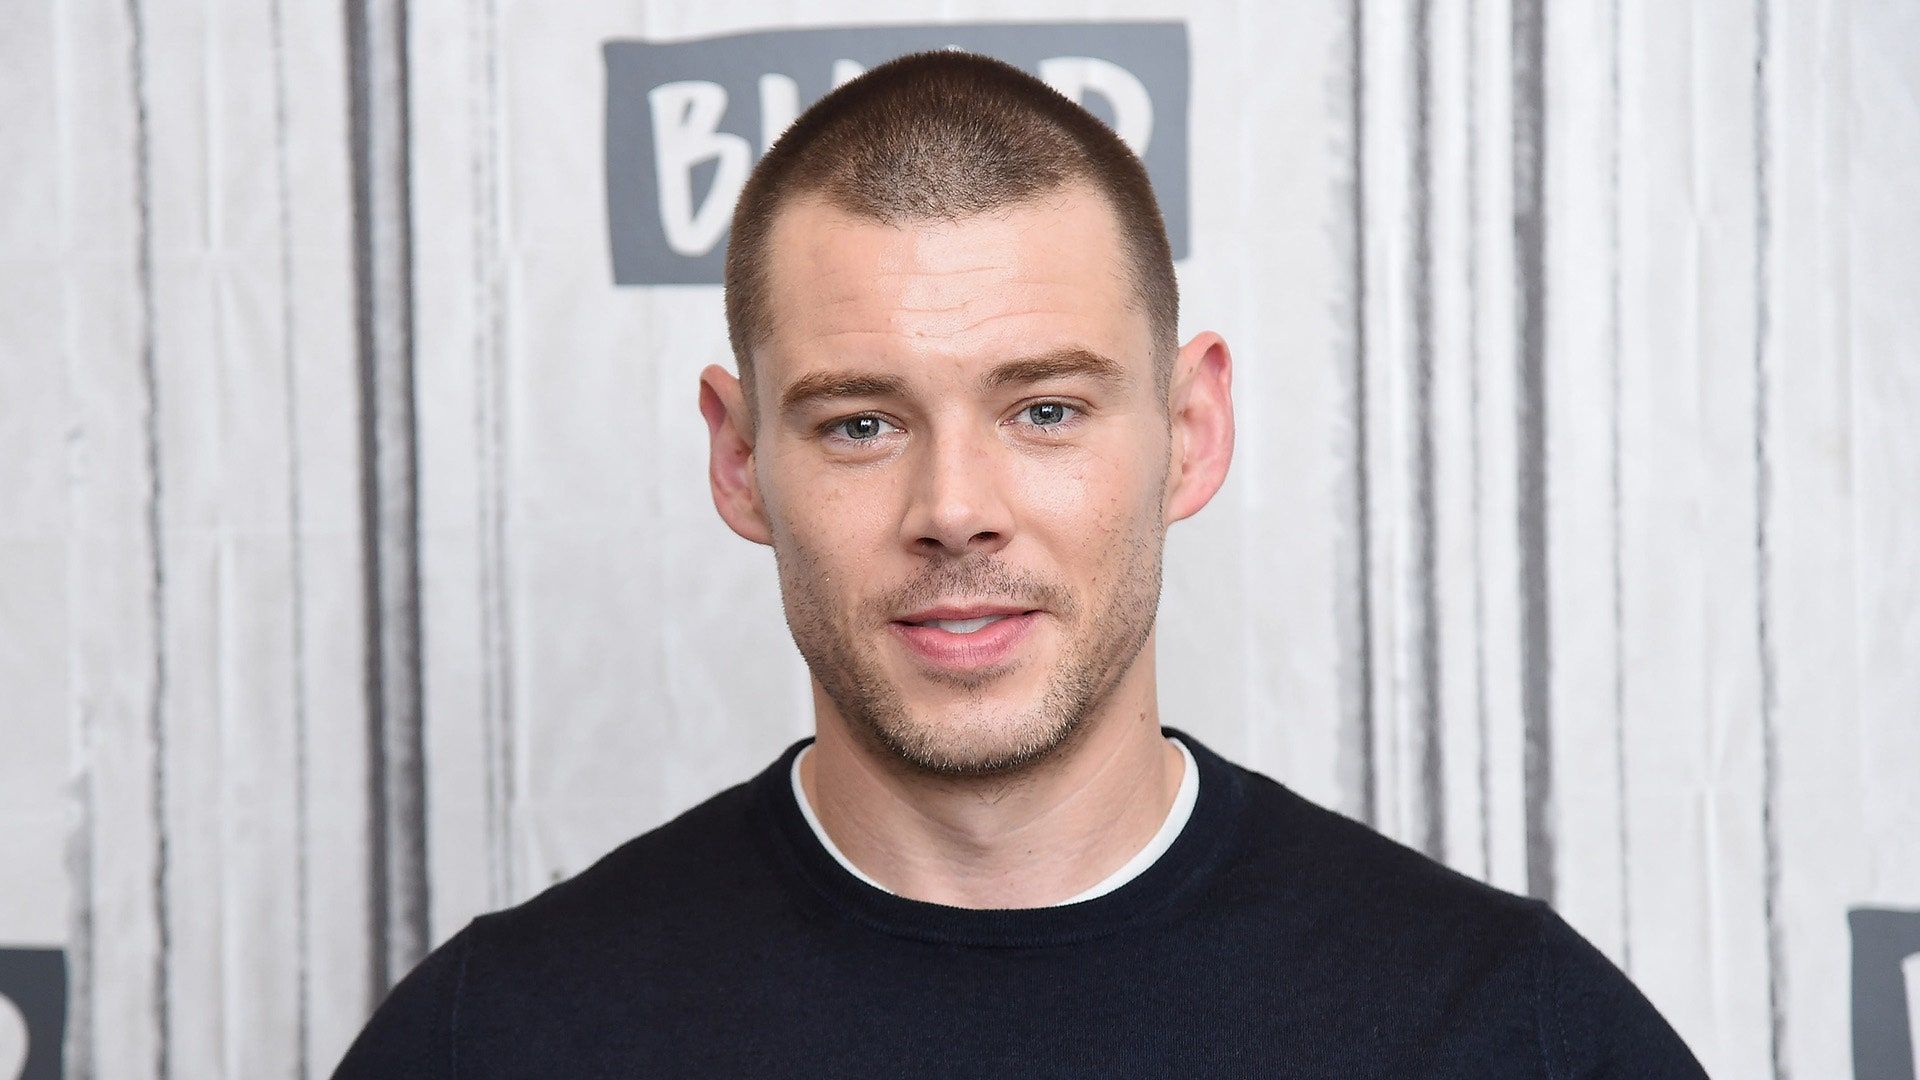 Sense8 Actor Brian J. Smith Comes Out as Gay. them